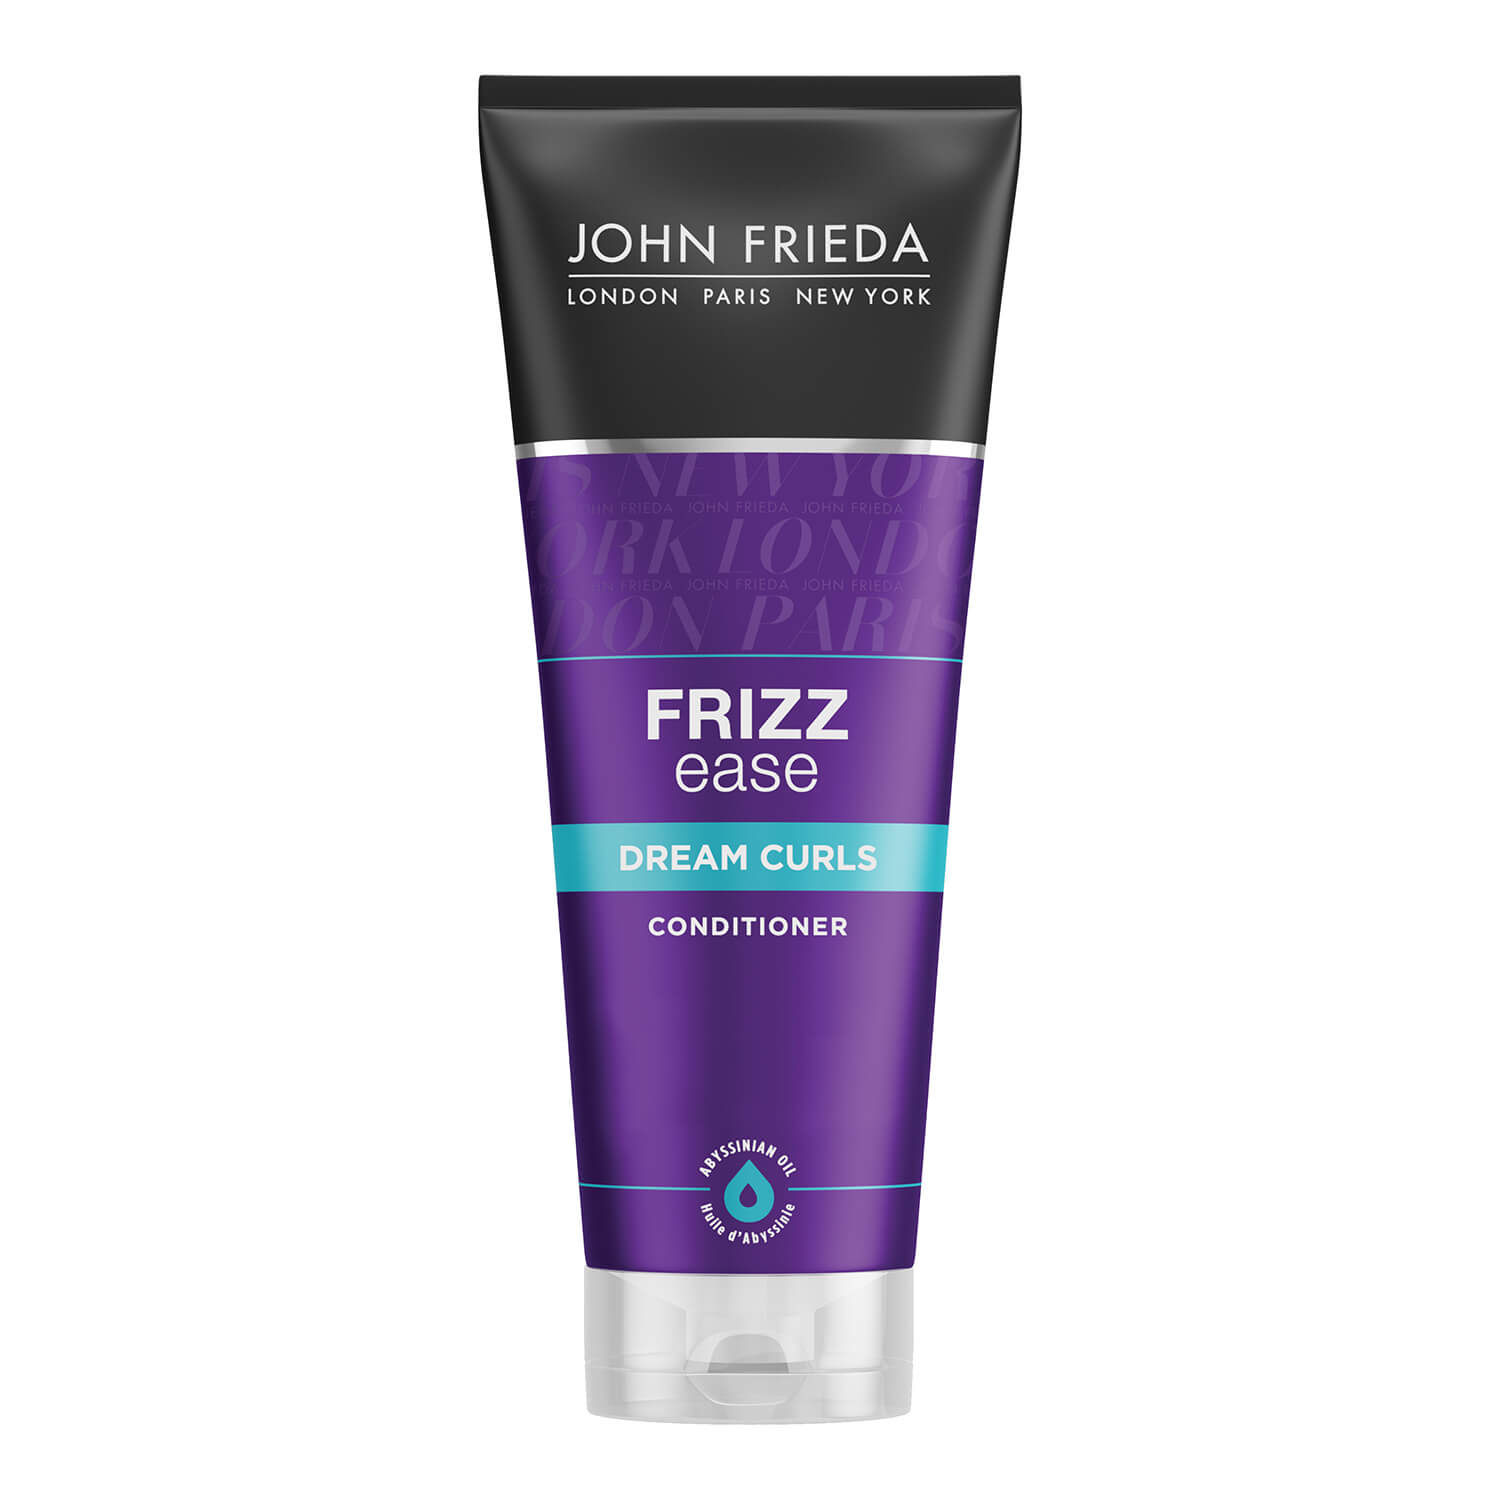 John Frieda Frizz Ease Dream Curls Conditioner 1 Shaws Department Stores